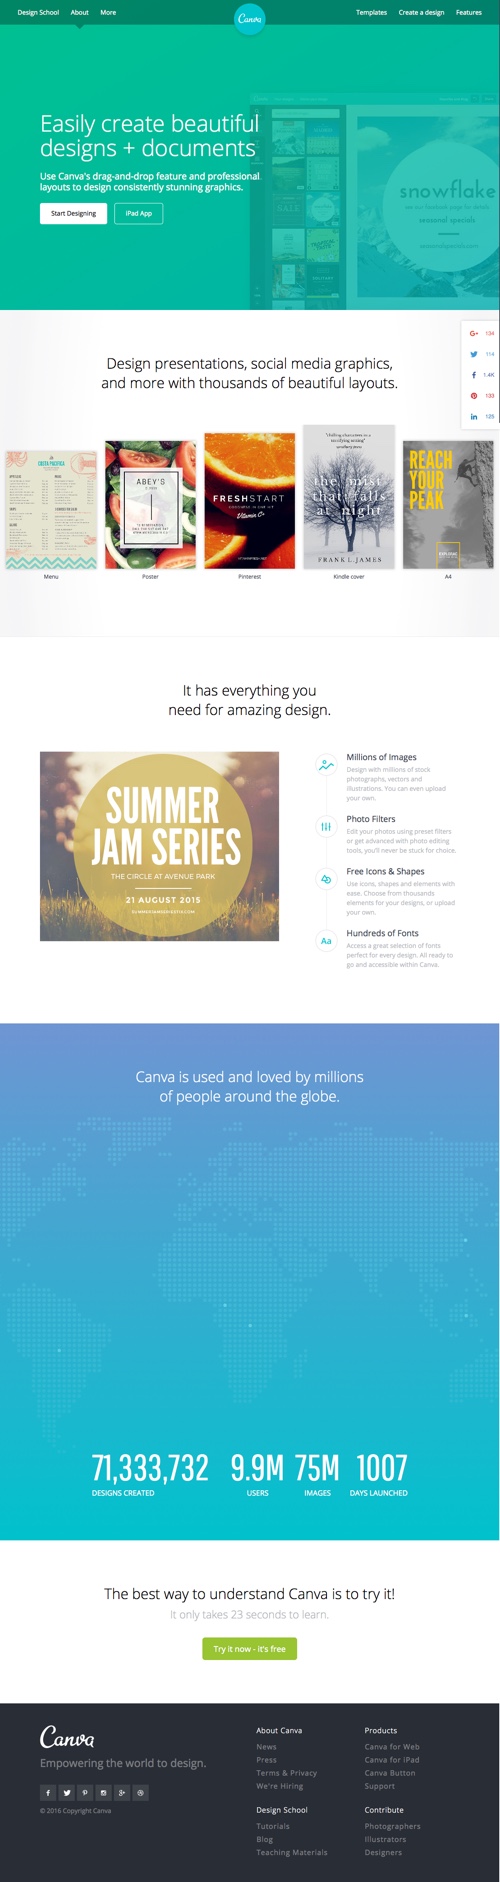 about-page-inspiration-8-canva